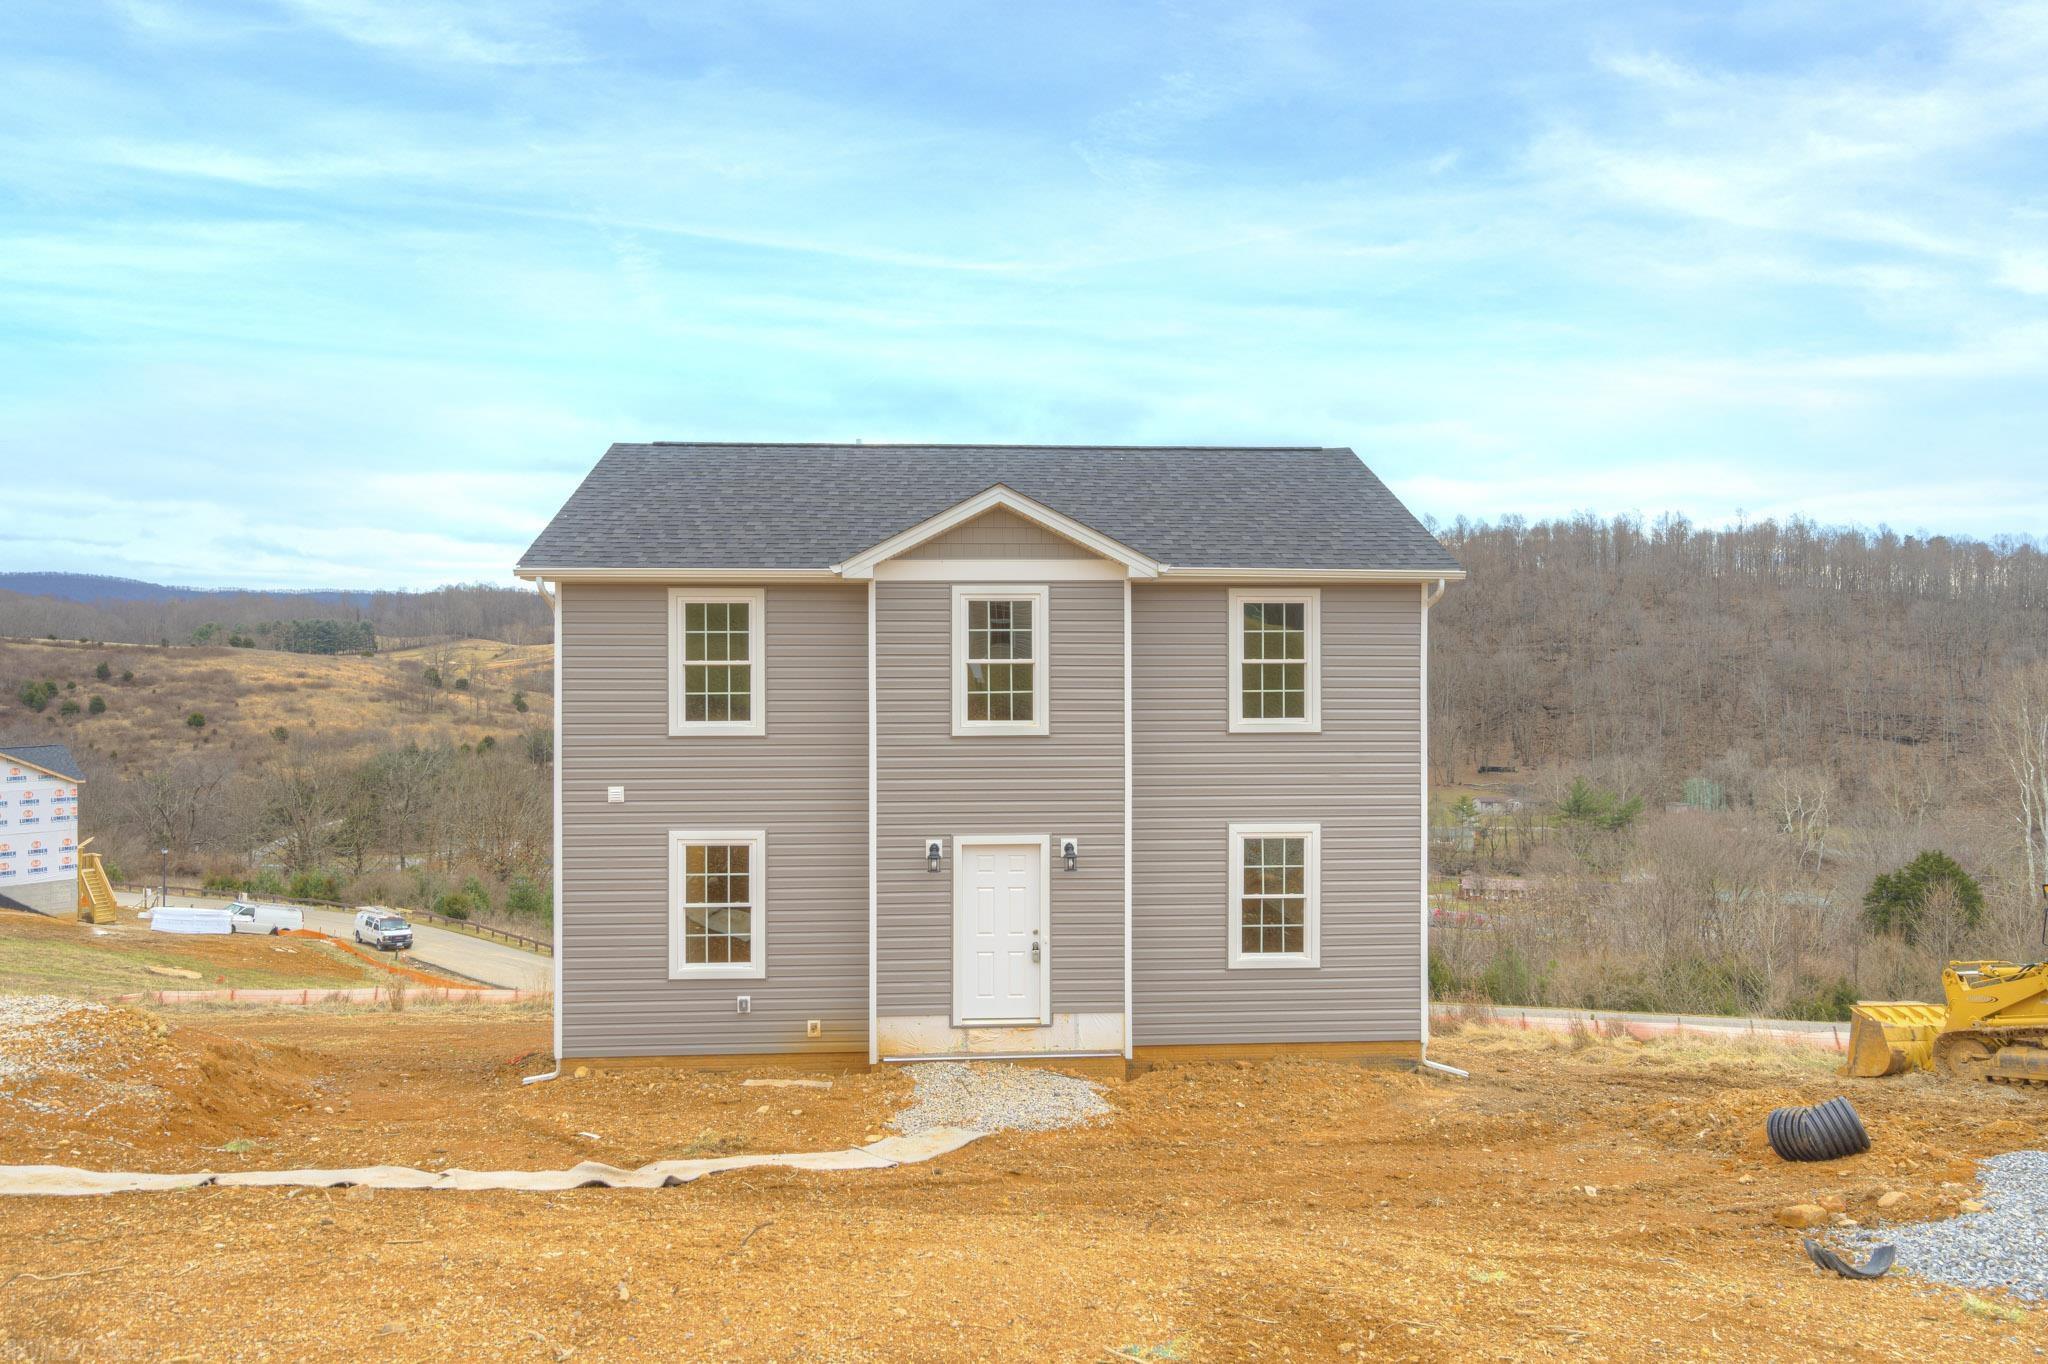 Your brand new home awaits with its amazing mountain views. This Home is Under Construction and sits in one of the newest up and coming communities. Located just 15 minutes from downtown Blacksburg. With 3 bedroom 2.5 baths there is plenty of space for you and your family. Large walk-out basement perfect for additional living space if needed in the future. The neighborhood offers walking trails, picnic shelters, a playground, basketball court, and 22 acres of common land! Come watch the sunset over the mountains and never worry about mowing the Grass again, living in this Maintenance Free Neighborhood. Why buy an older home when you can buy a brand new home with all its warranties.